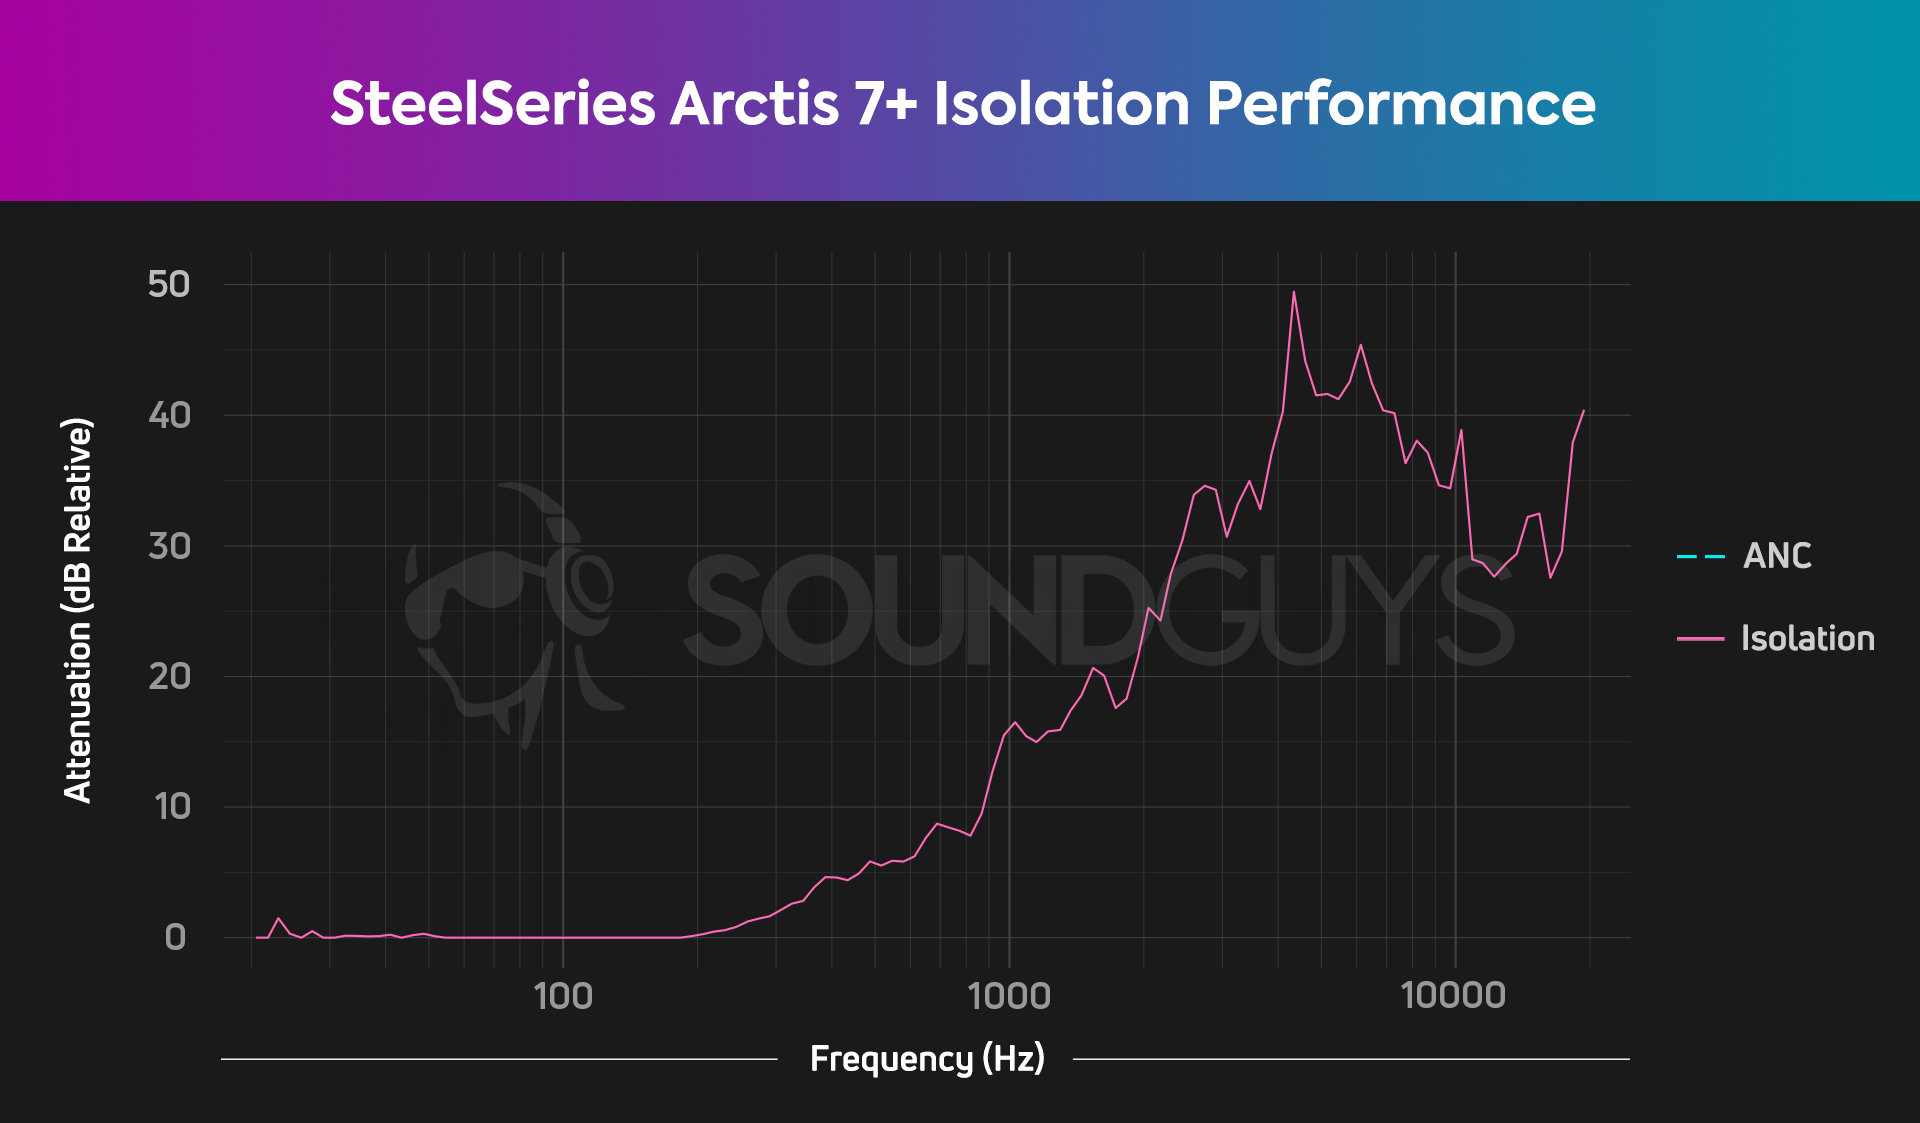 An isolation chart for the SteelSeries Arctis 7+, which shows decent if unremarkable isolation performance.